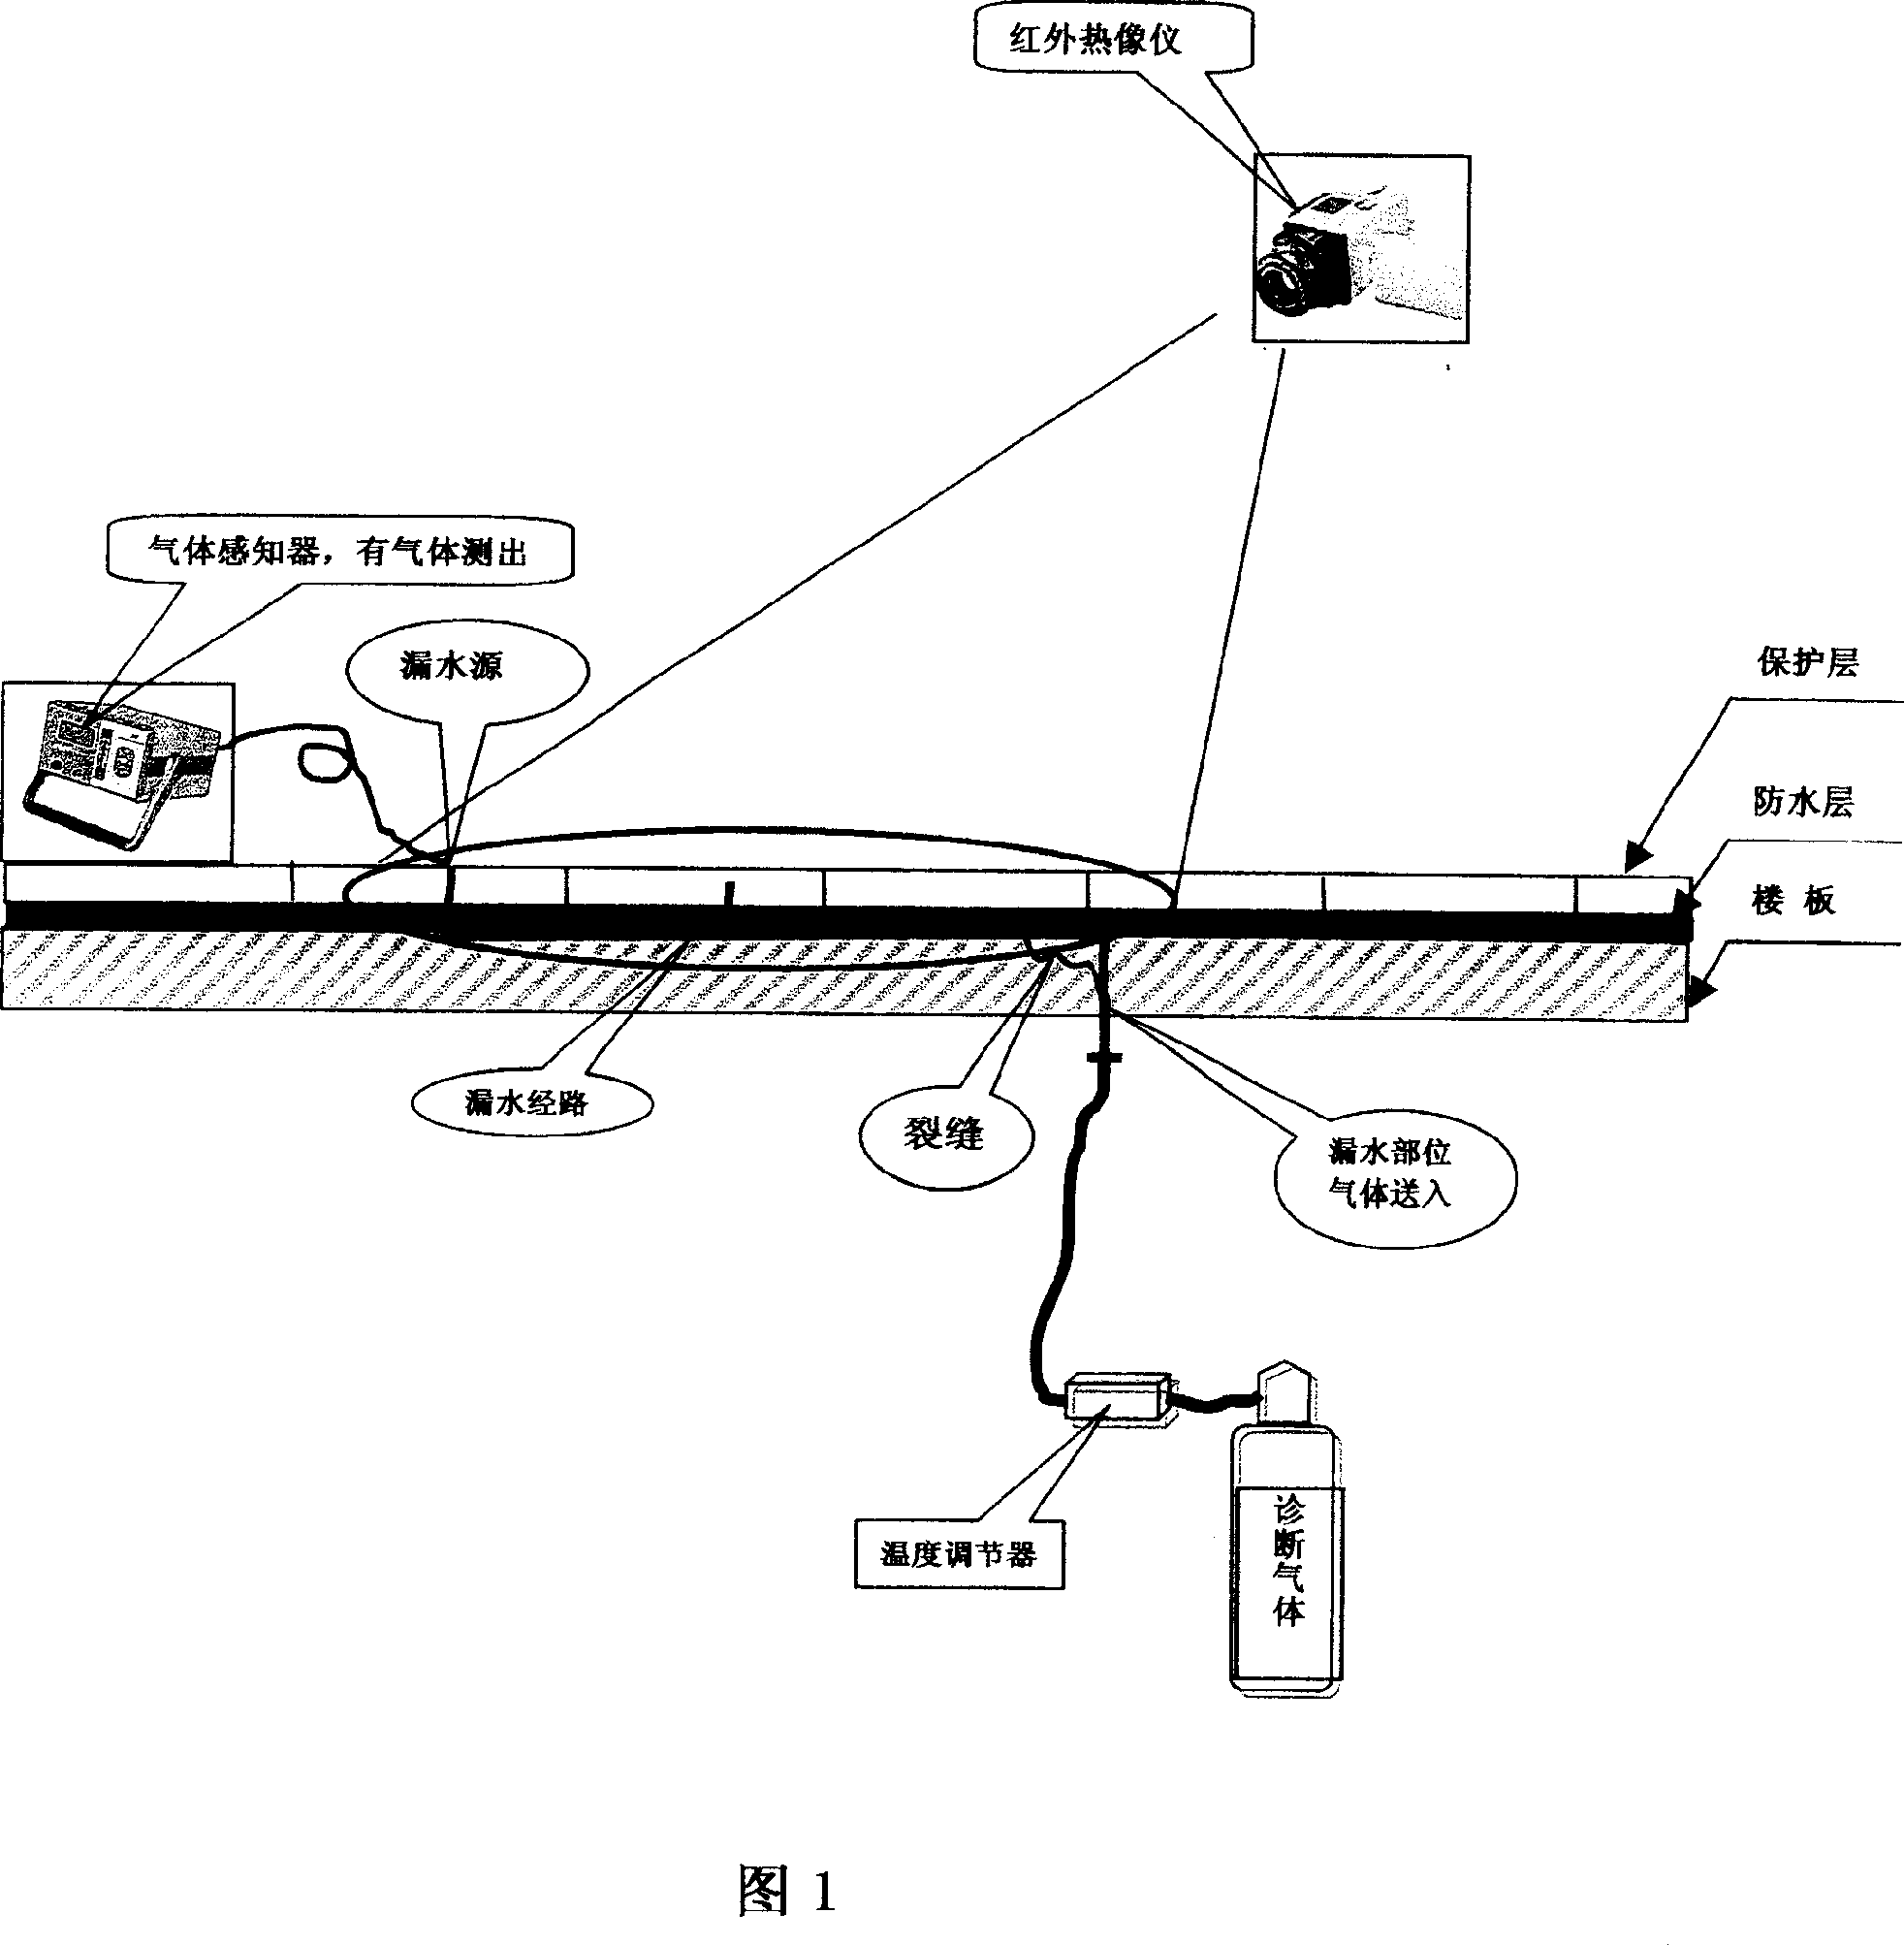 Method for detection and stopping leak for concrete buildings leakage source